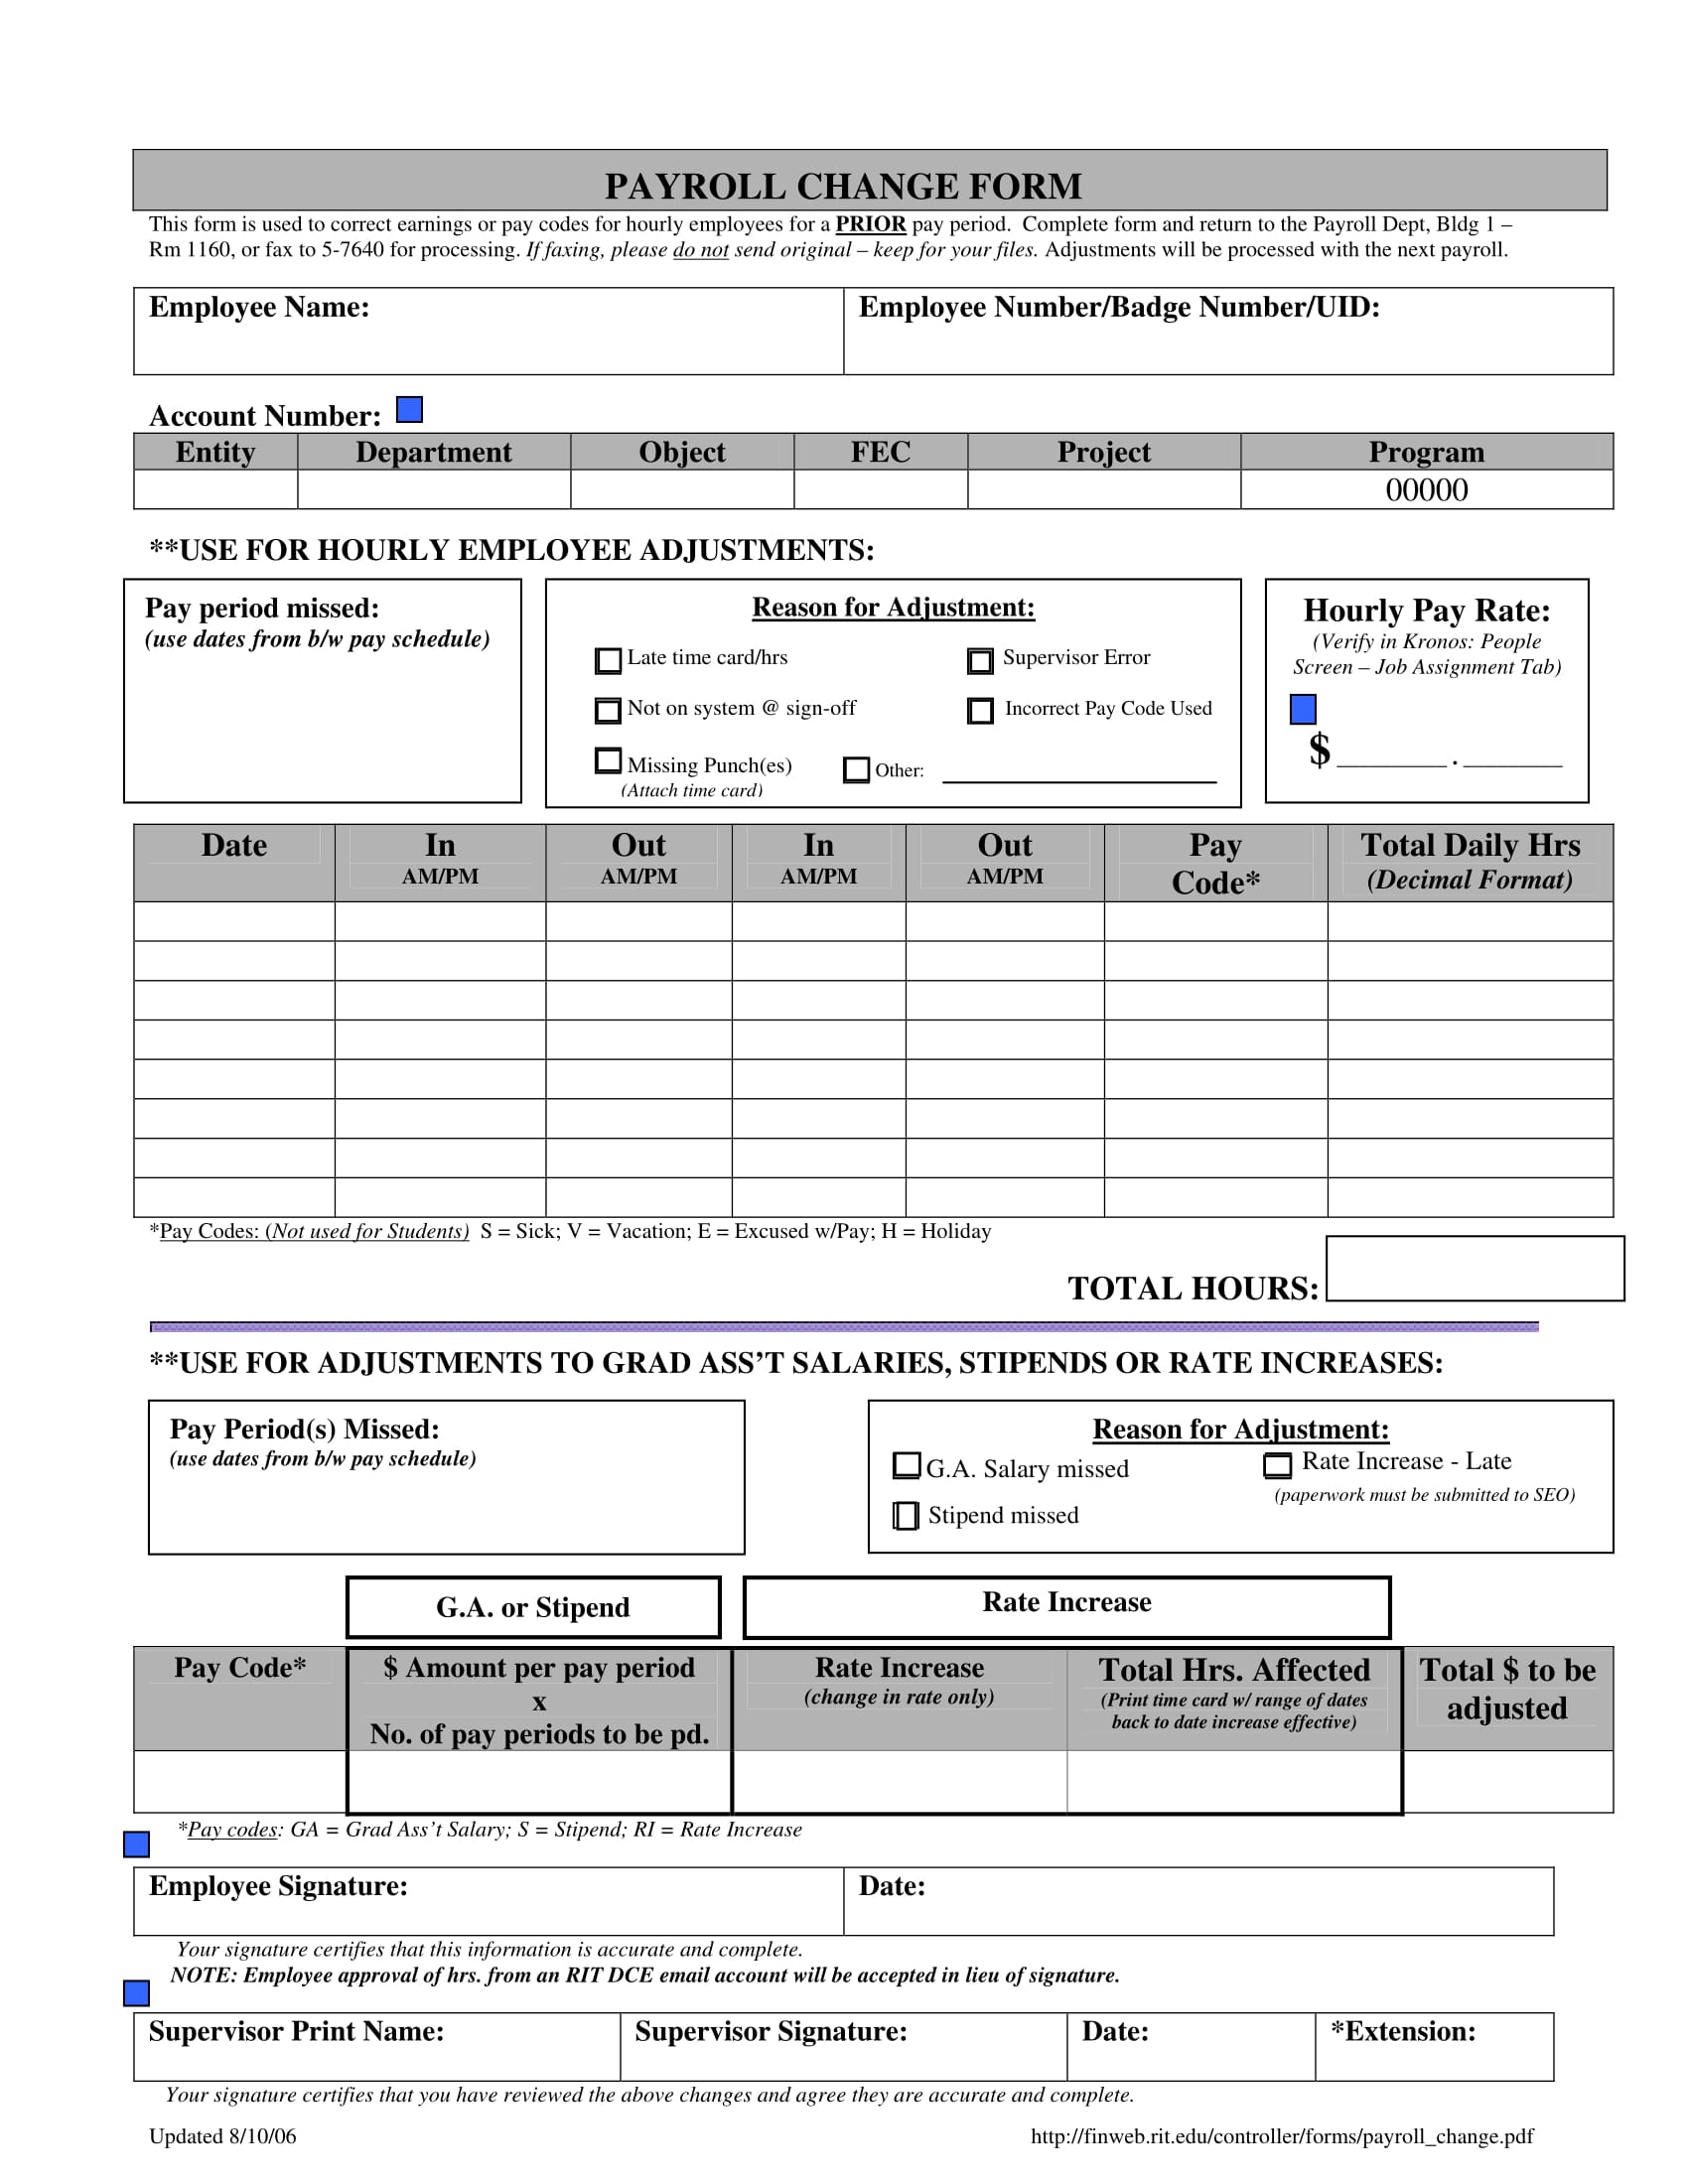 fillable payroll change form 1